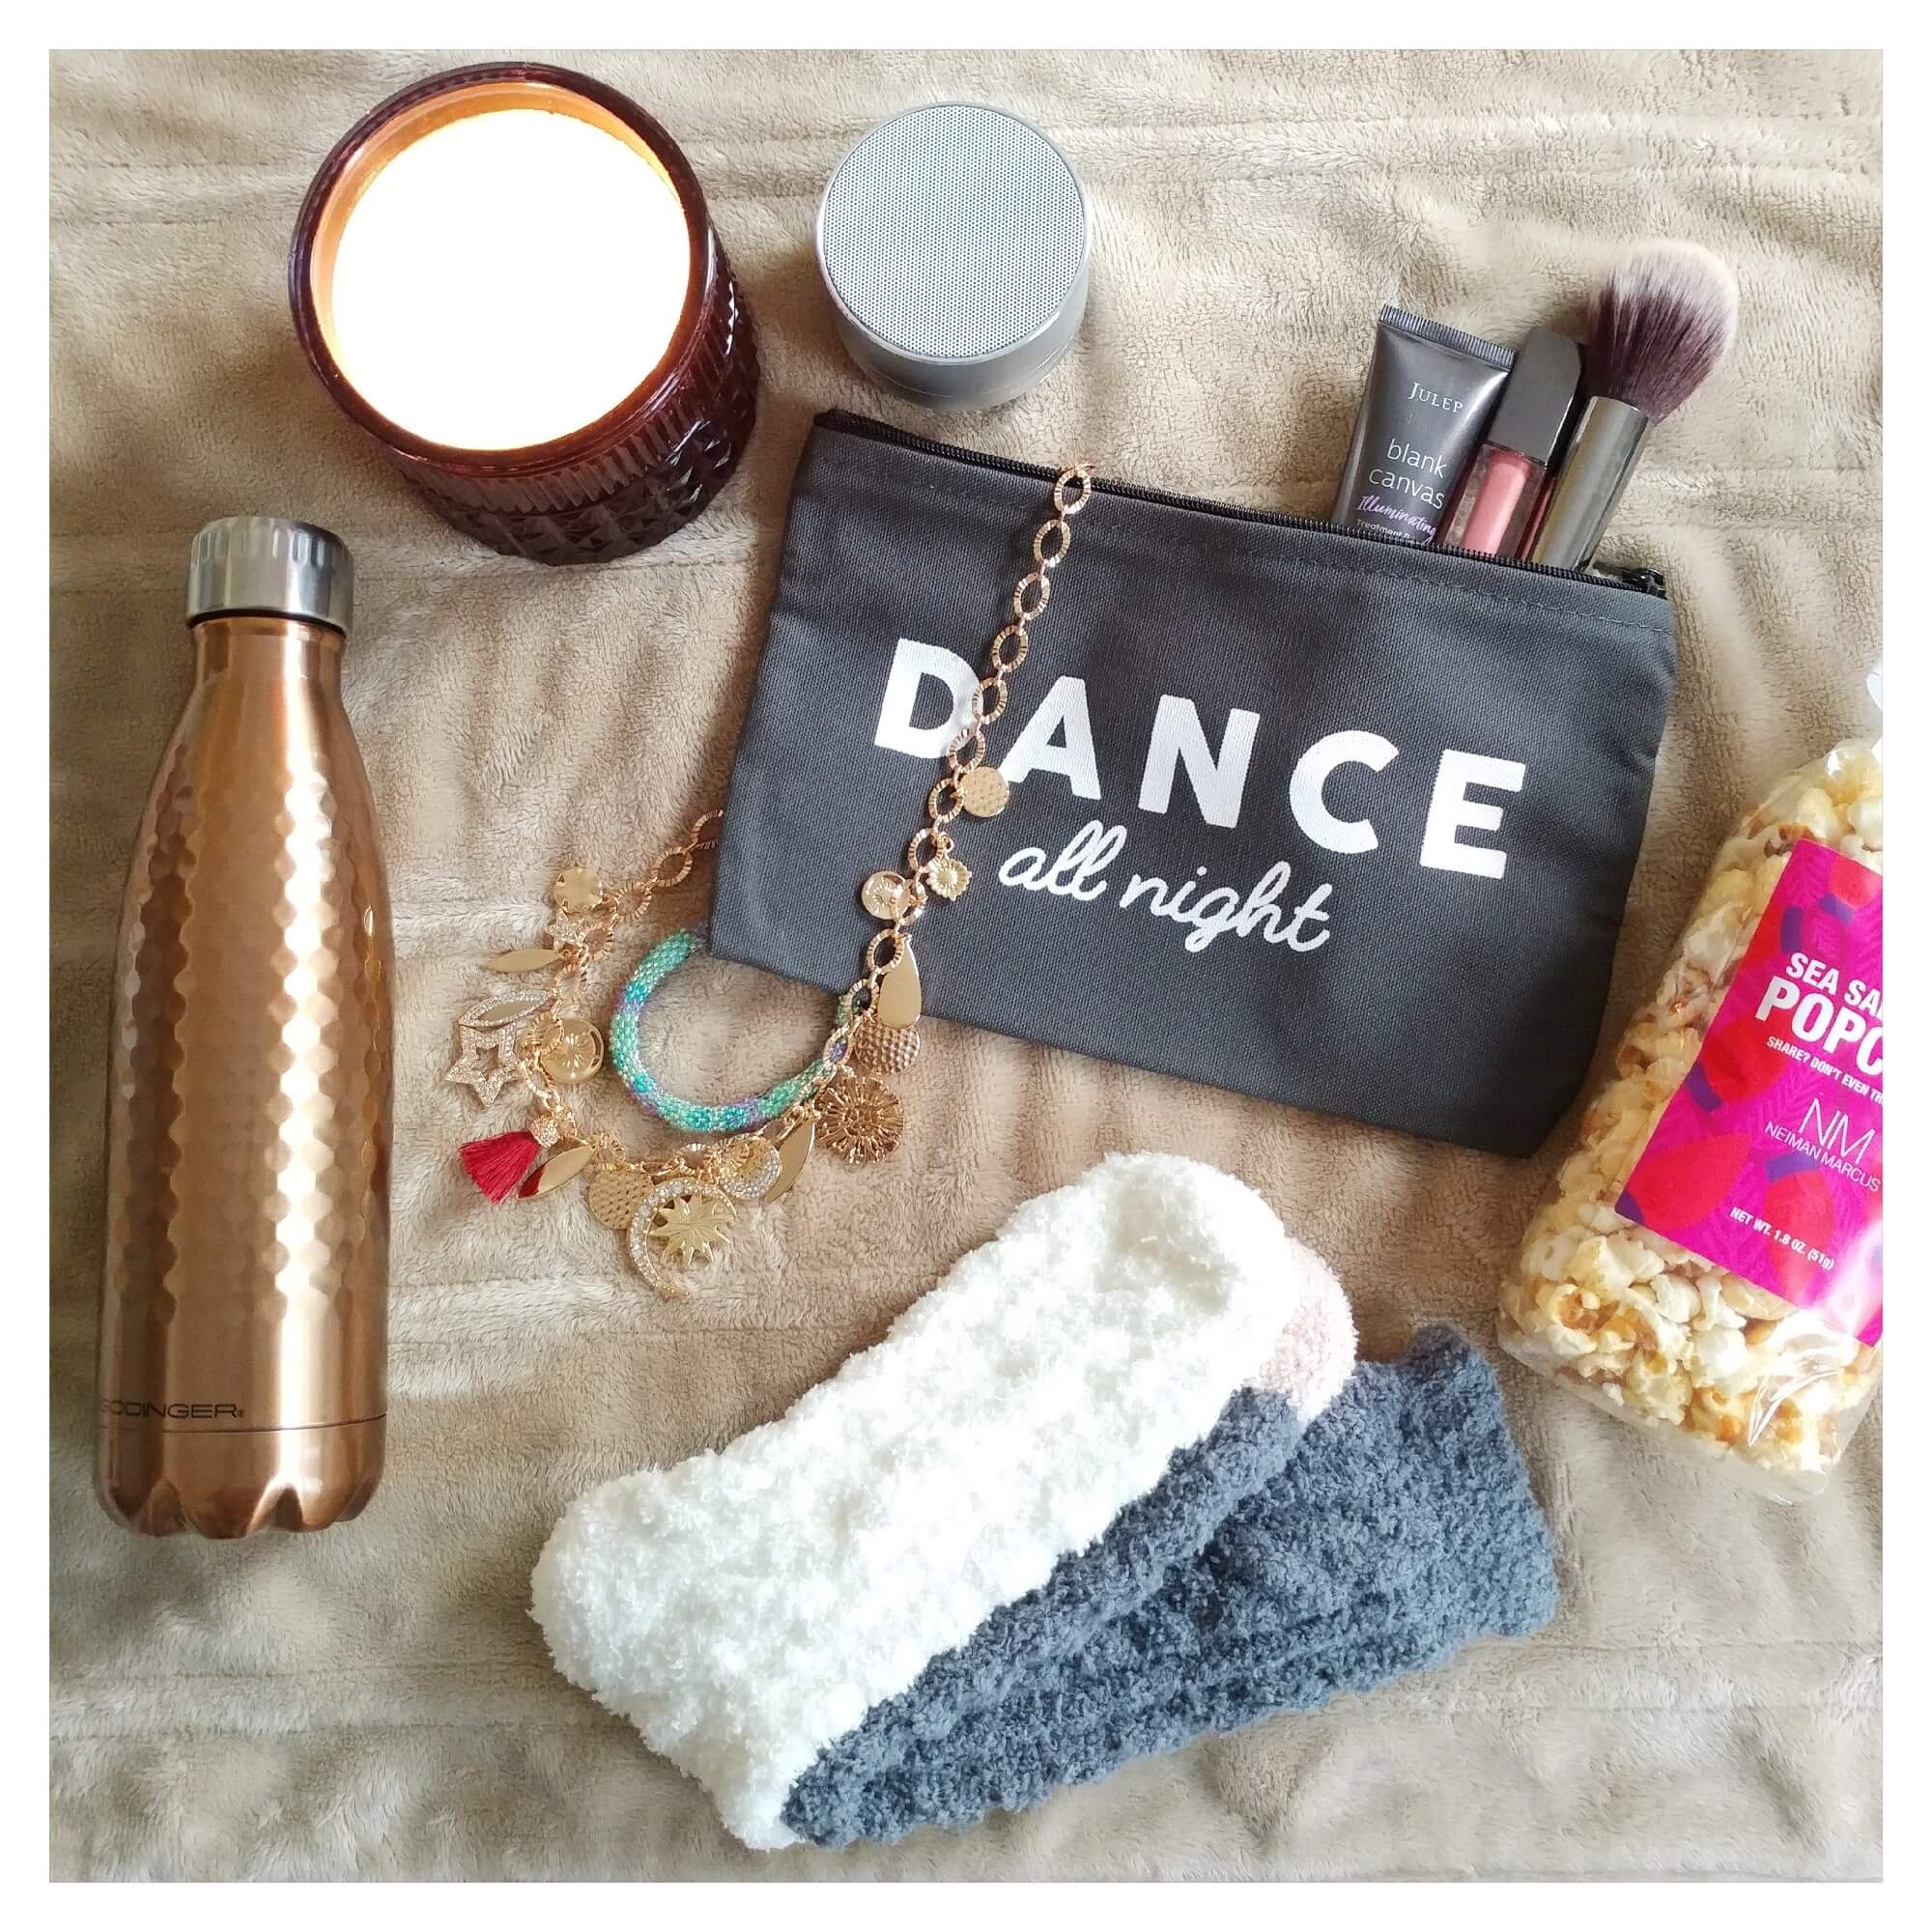 stay-warm-this-winter-cozy-socks-scented-candles-popcorn